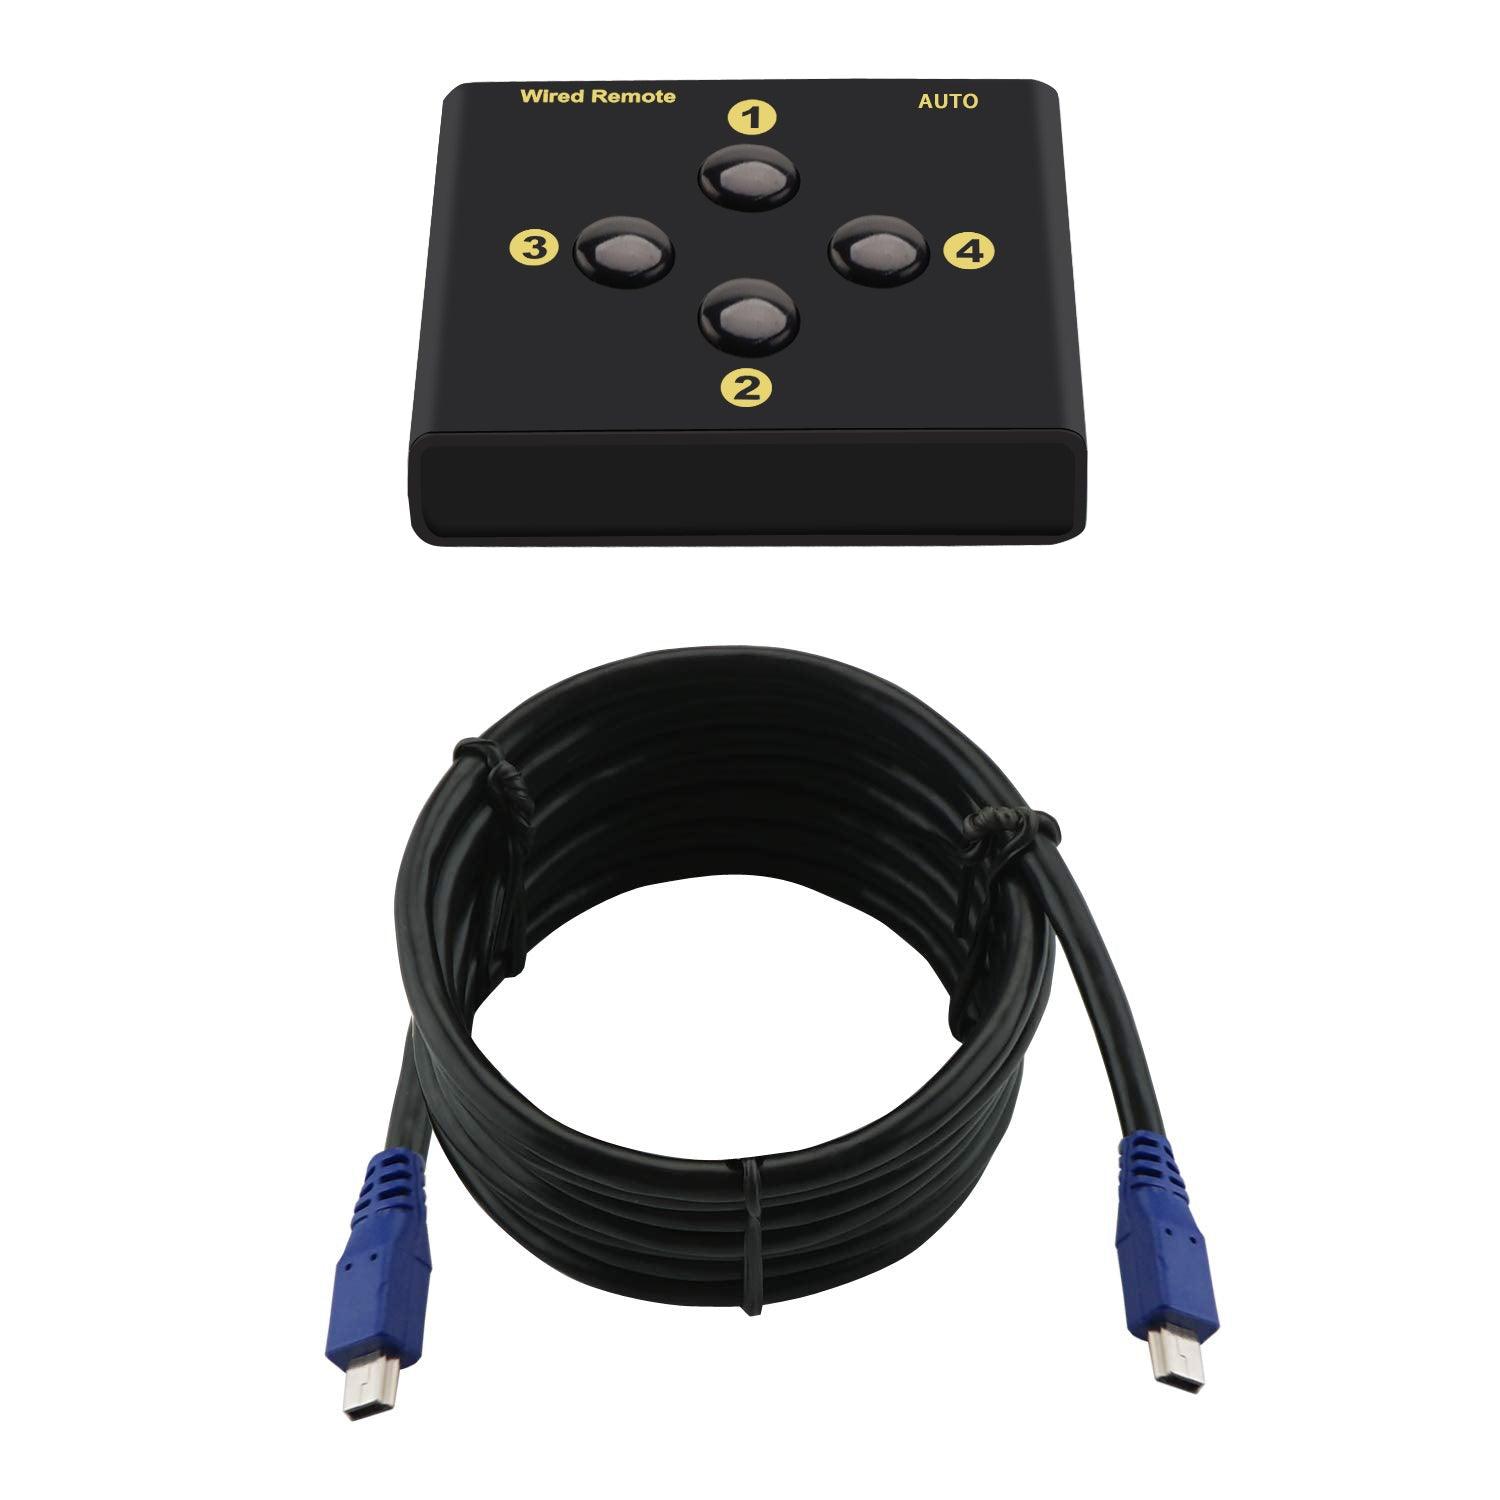 Replacement Wired Remoter Toggle Switcher for CKL Dual Monitor KVM Switches 4 Port - CKL KVM Switches